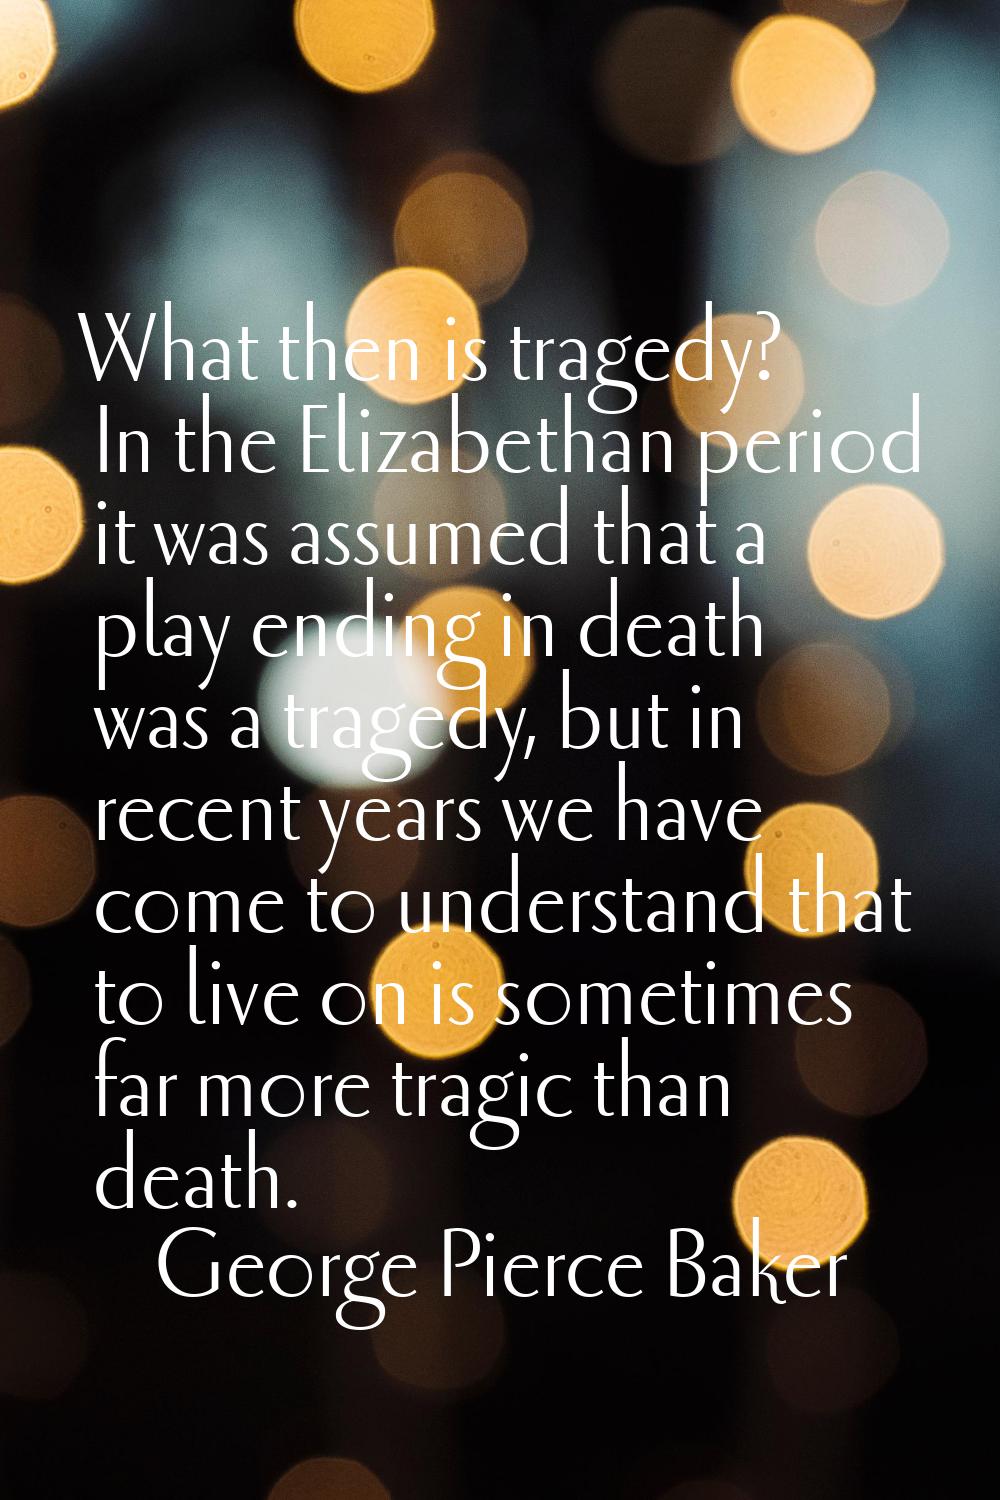 What then is tragedy? In the Elizabethan period it was assumed that a play ending in death was a tr